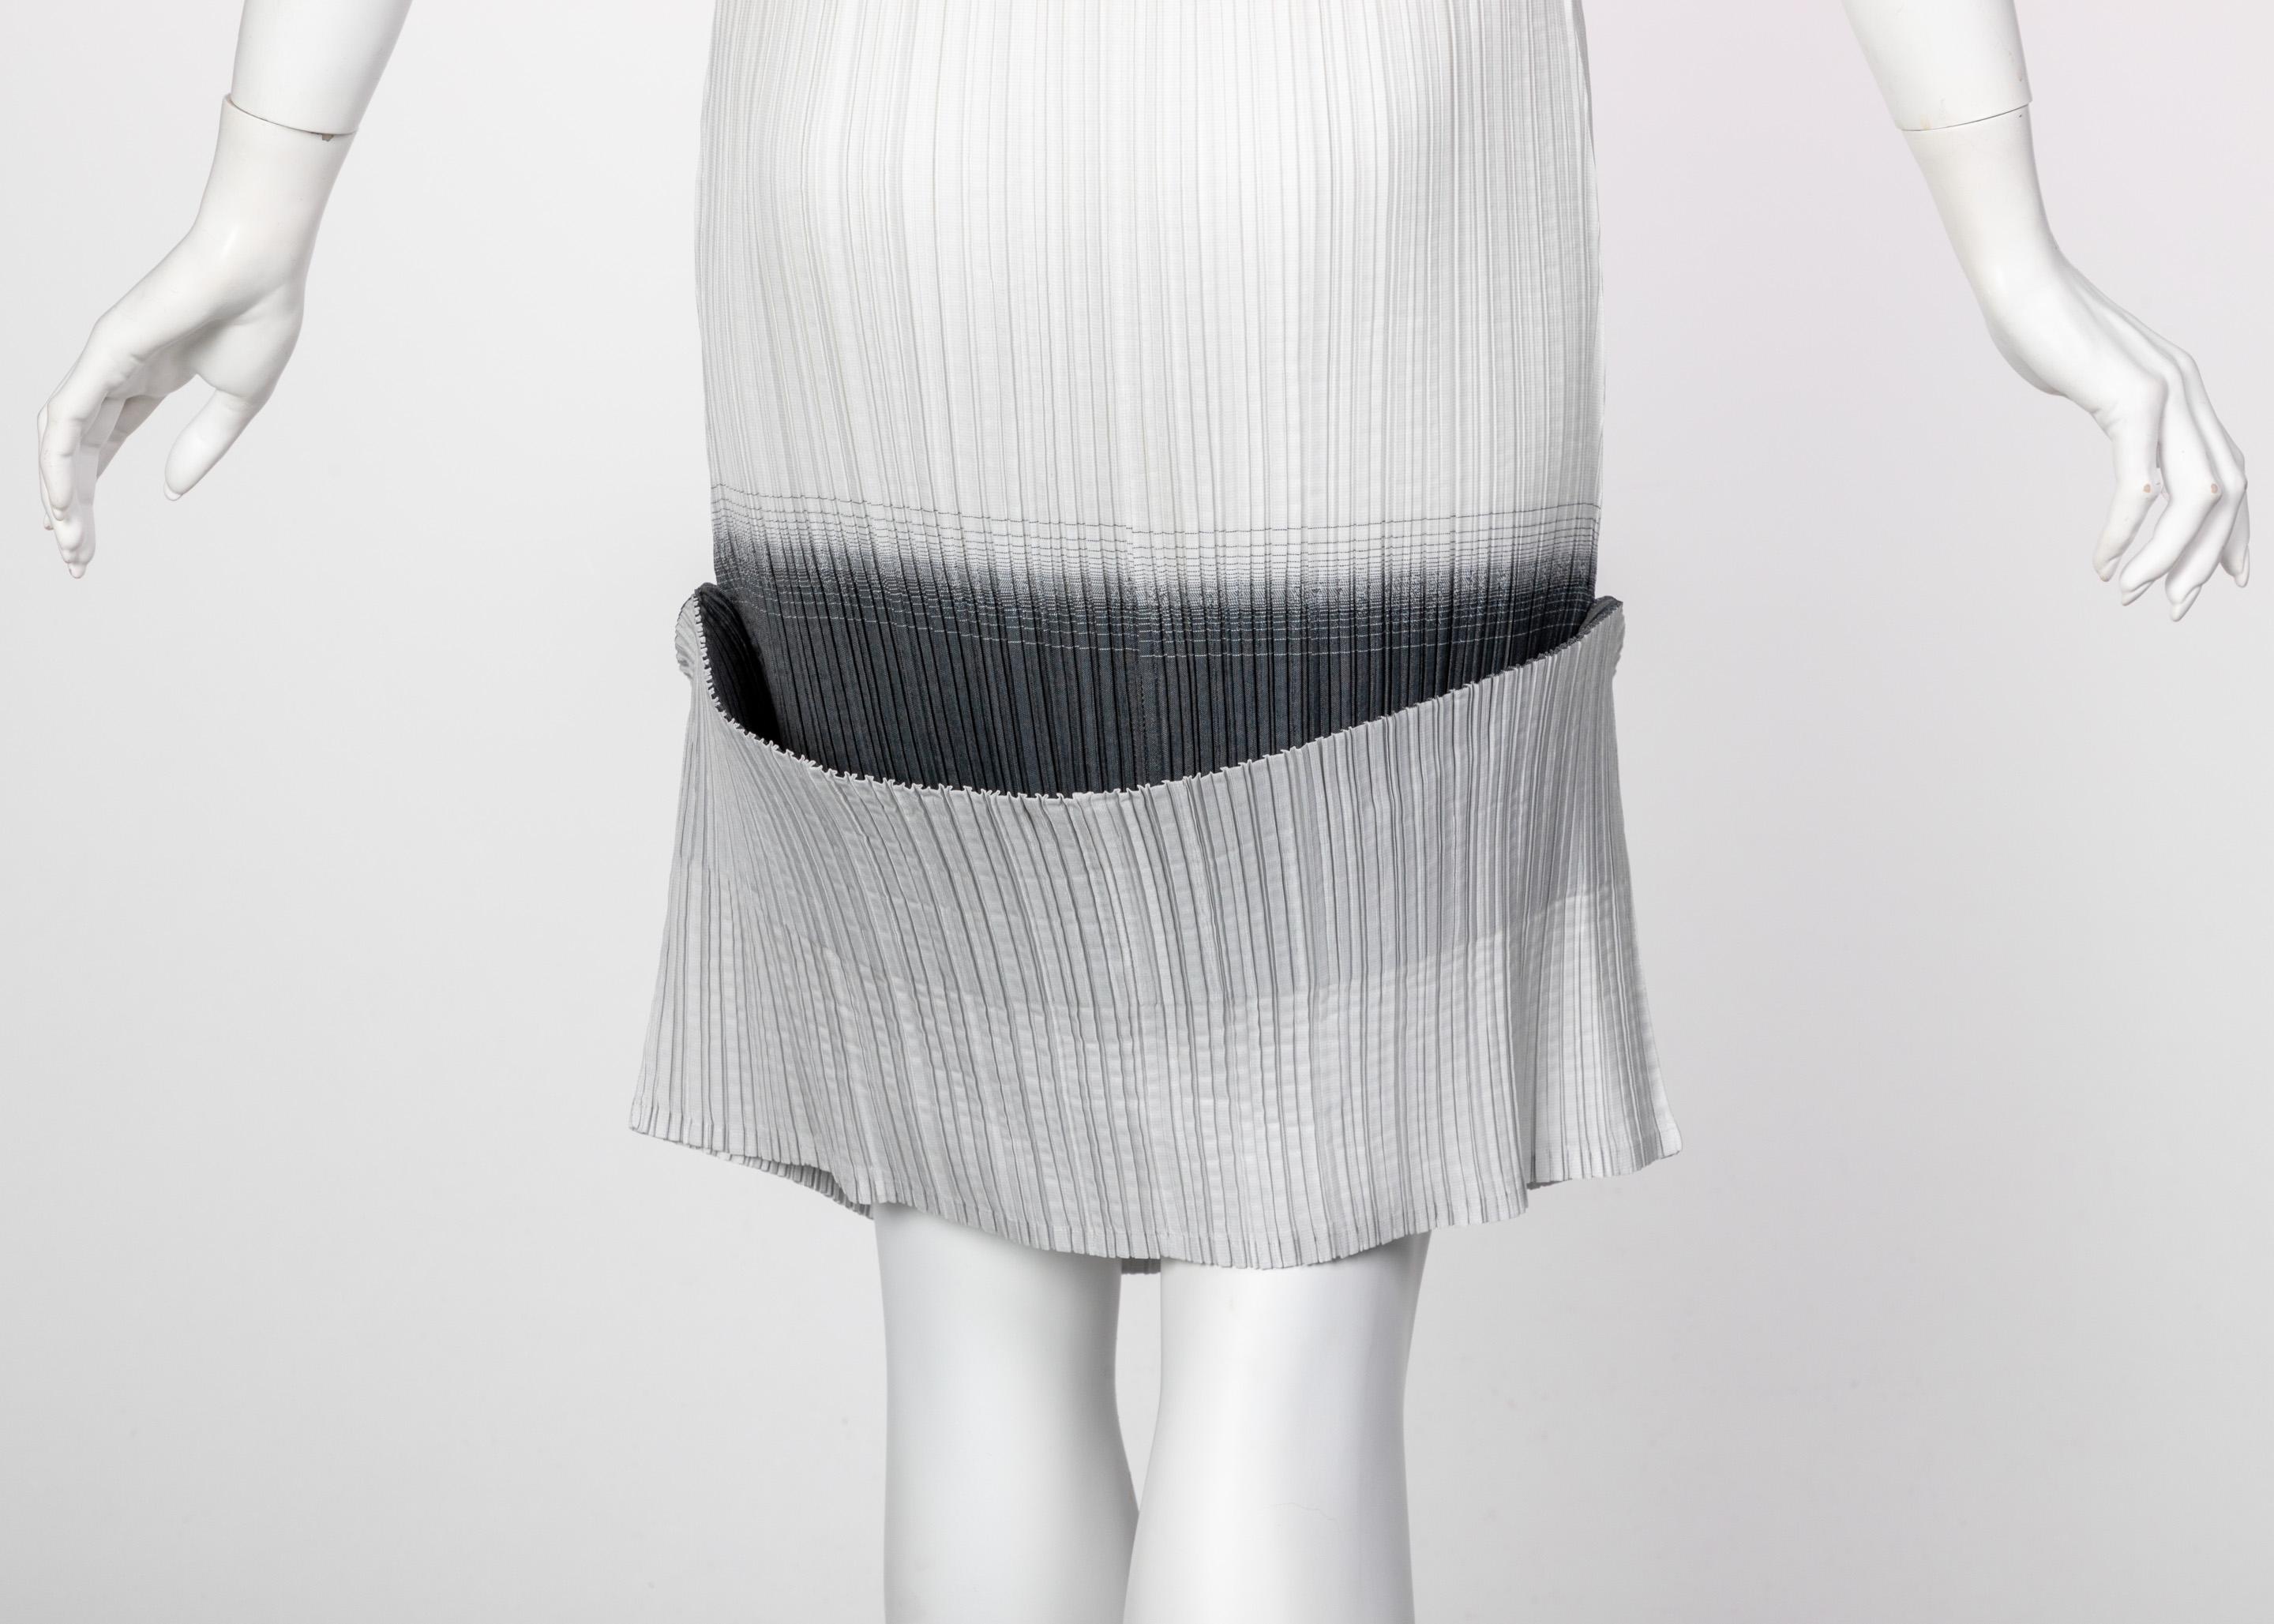 Issey Miyake “A Piece of Cloth” 2-Way White Gray Sleeveless Sculptural Dress For Sale 5